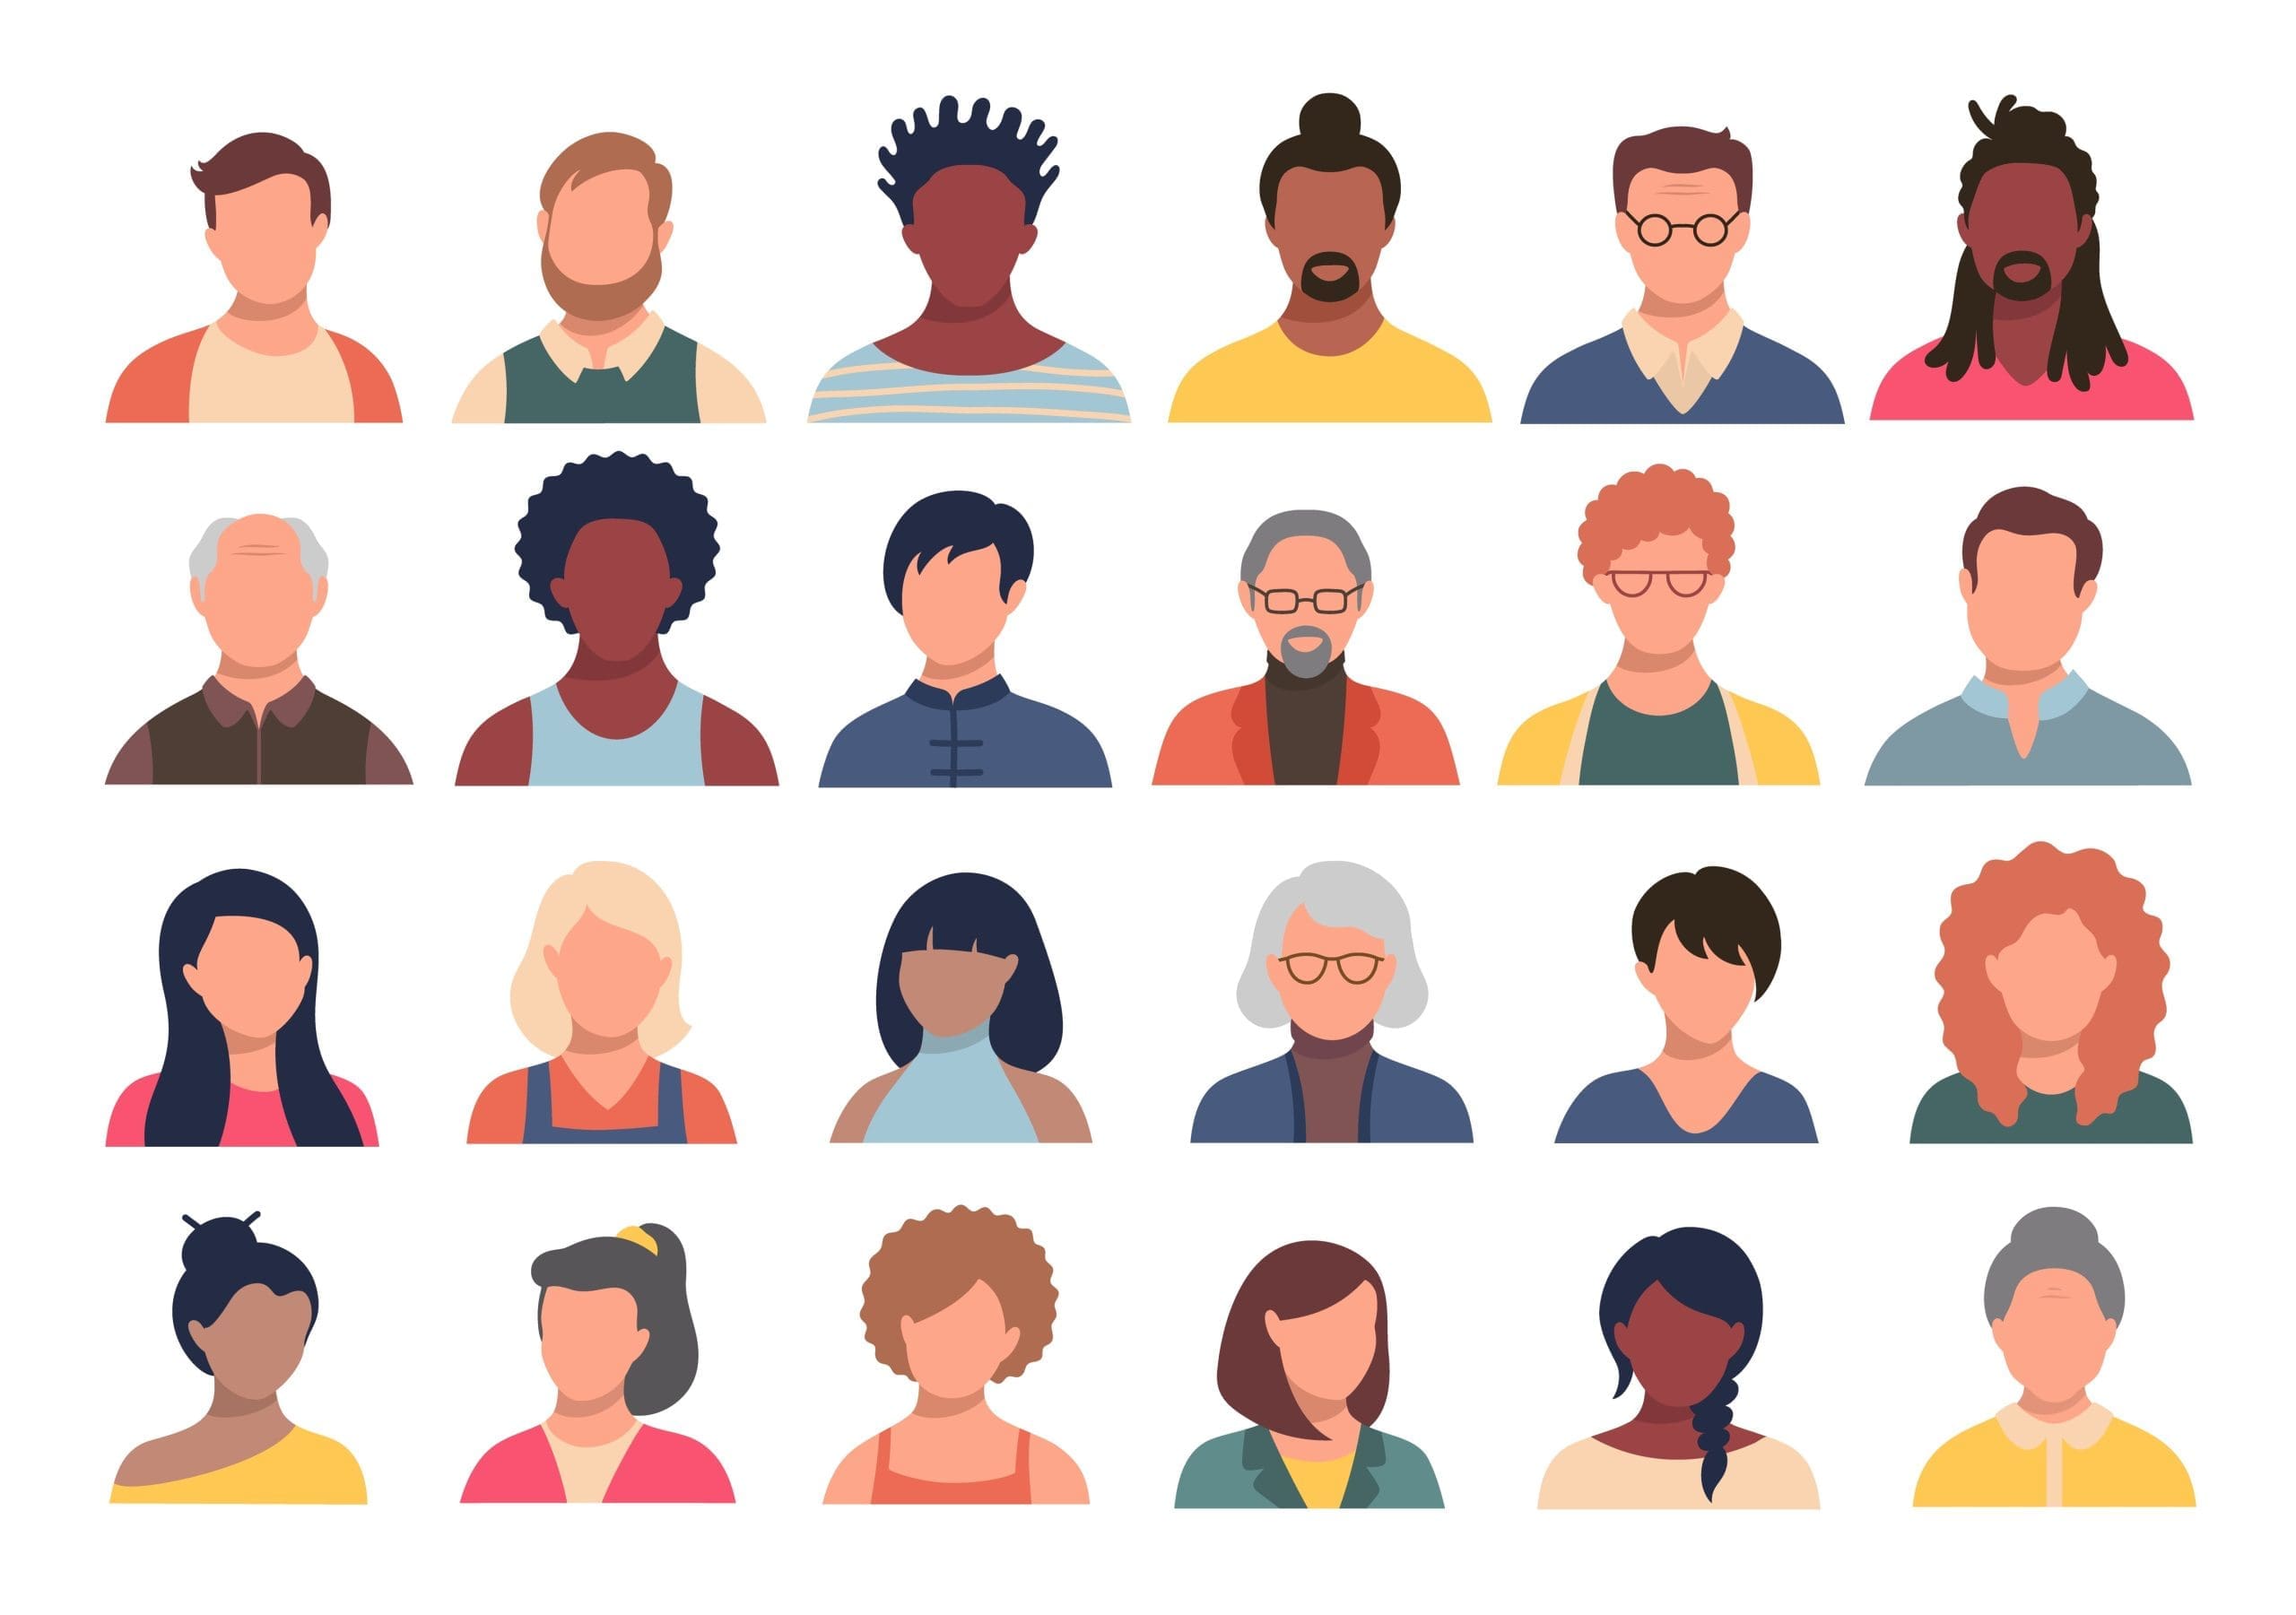 A set of people avatars with different hairstyles.